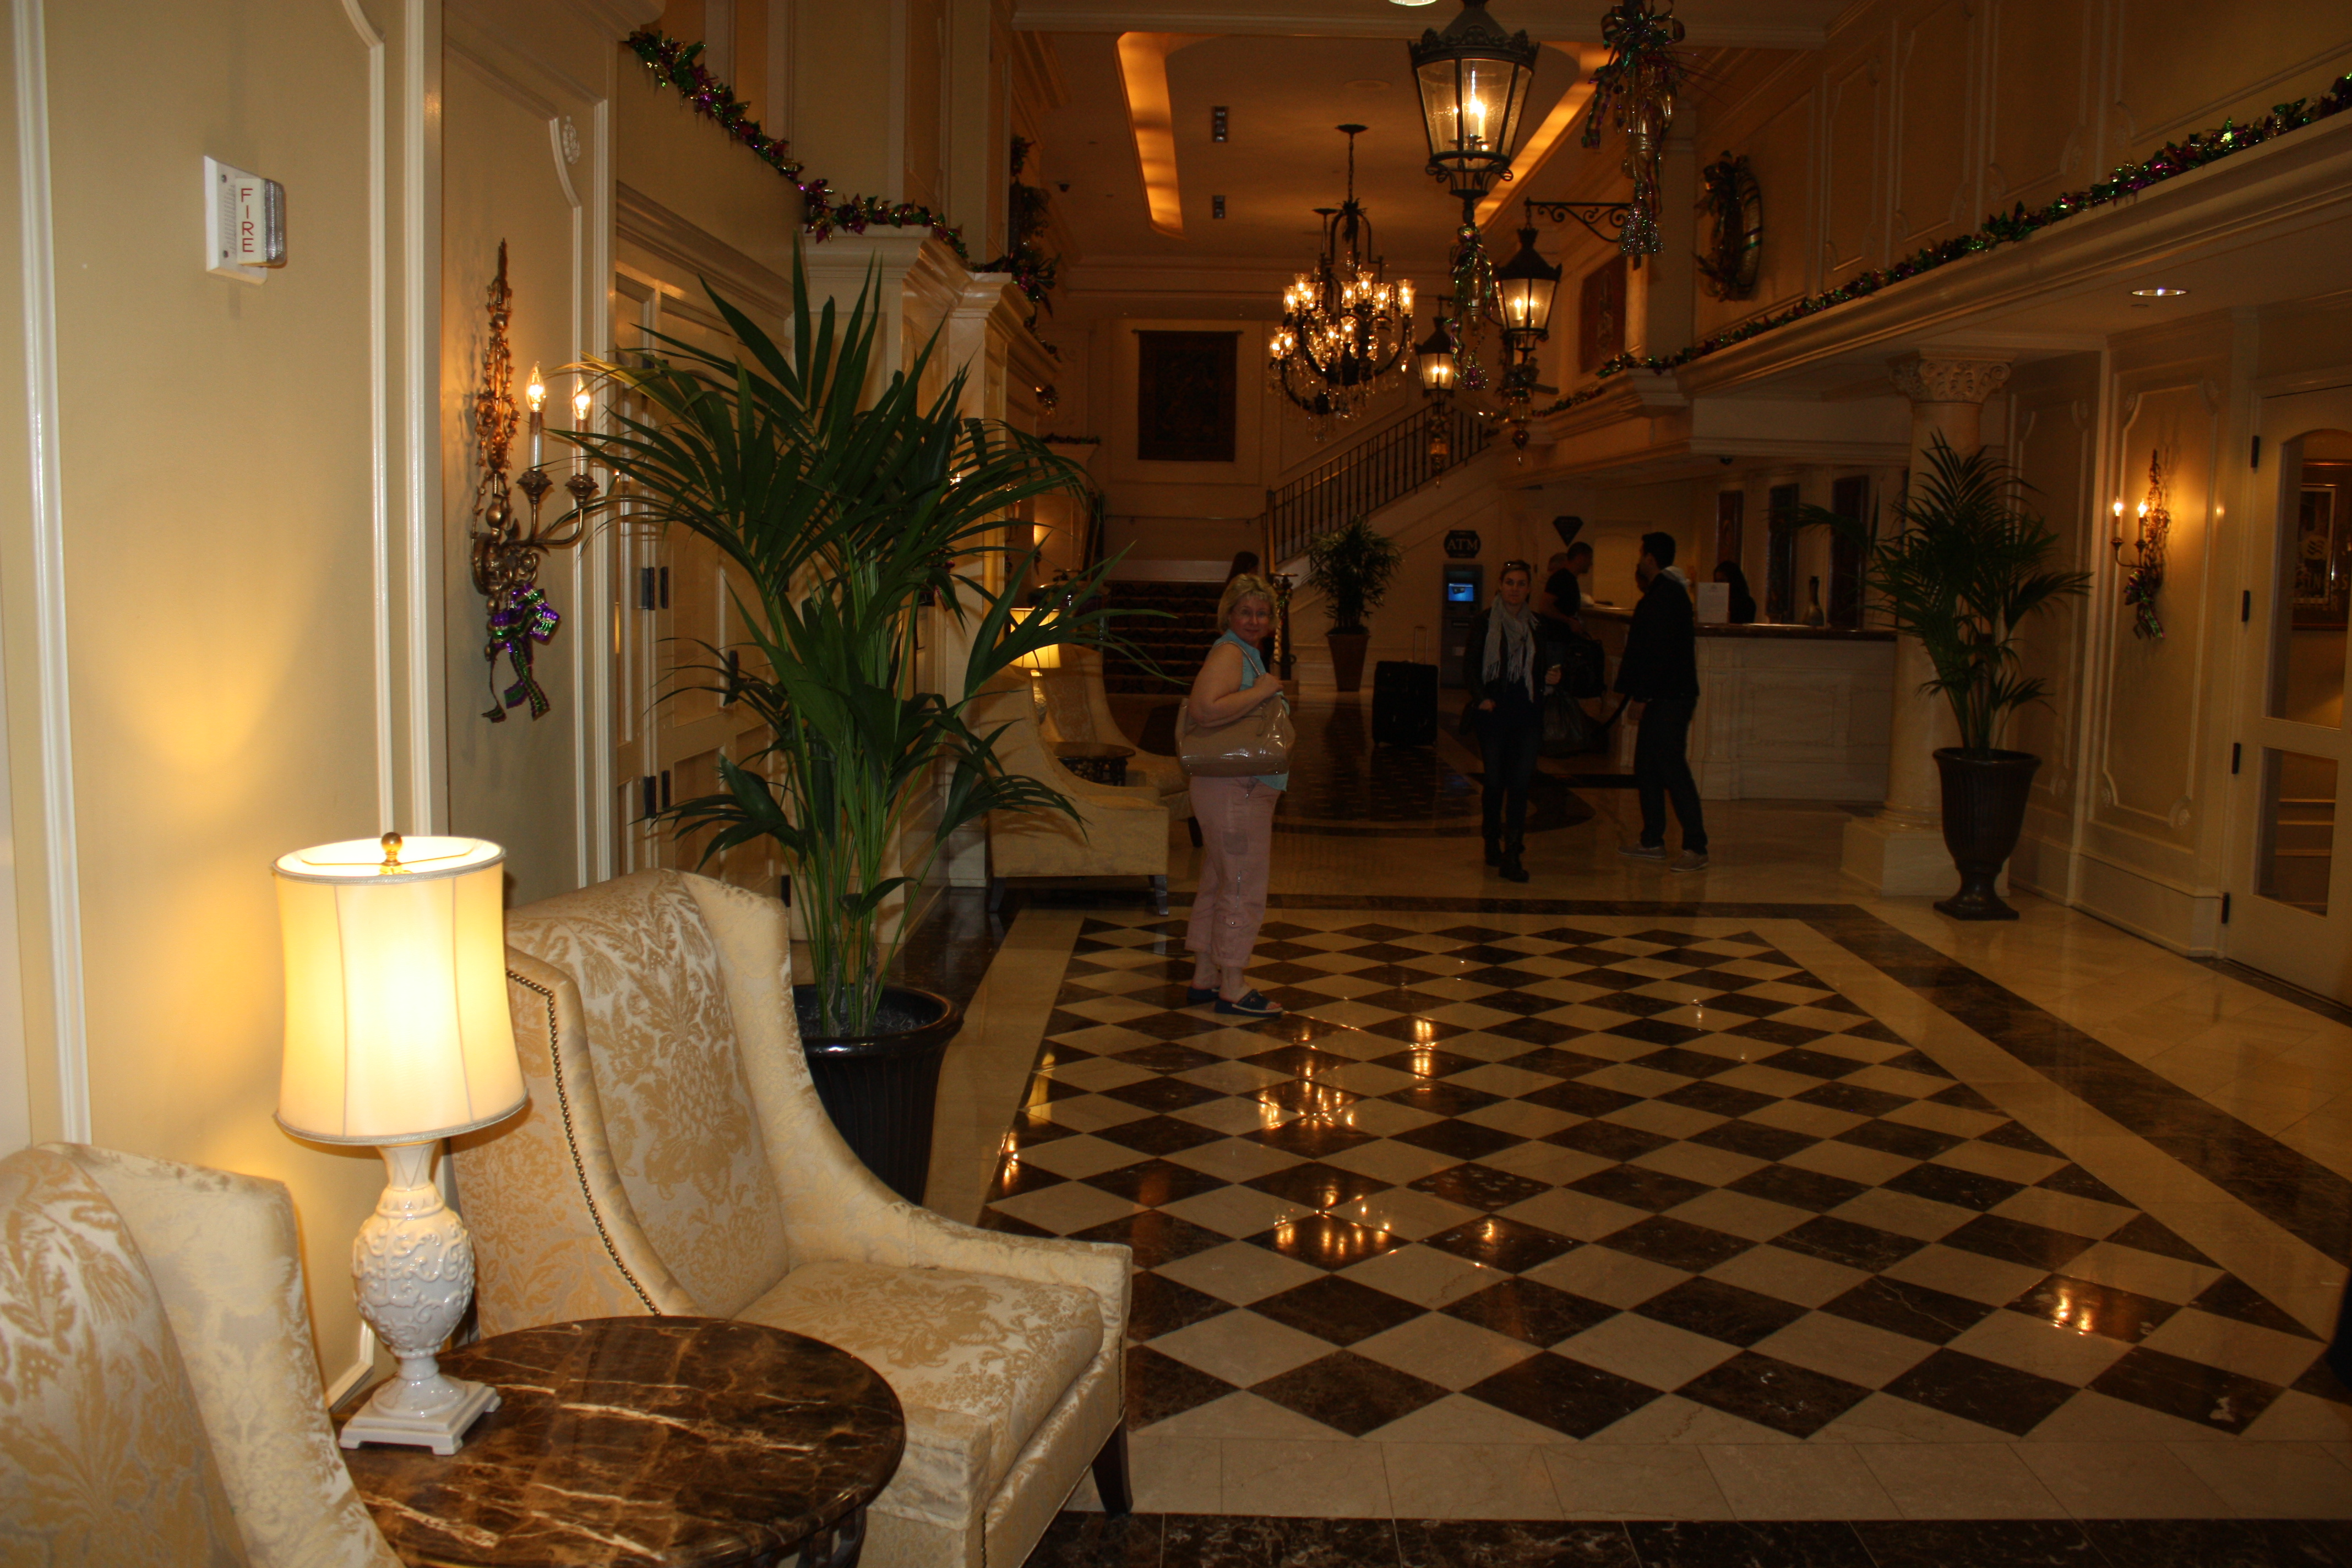 Foyer of the Crowne Plaza Hotel, Canal Street, New Orleans